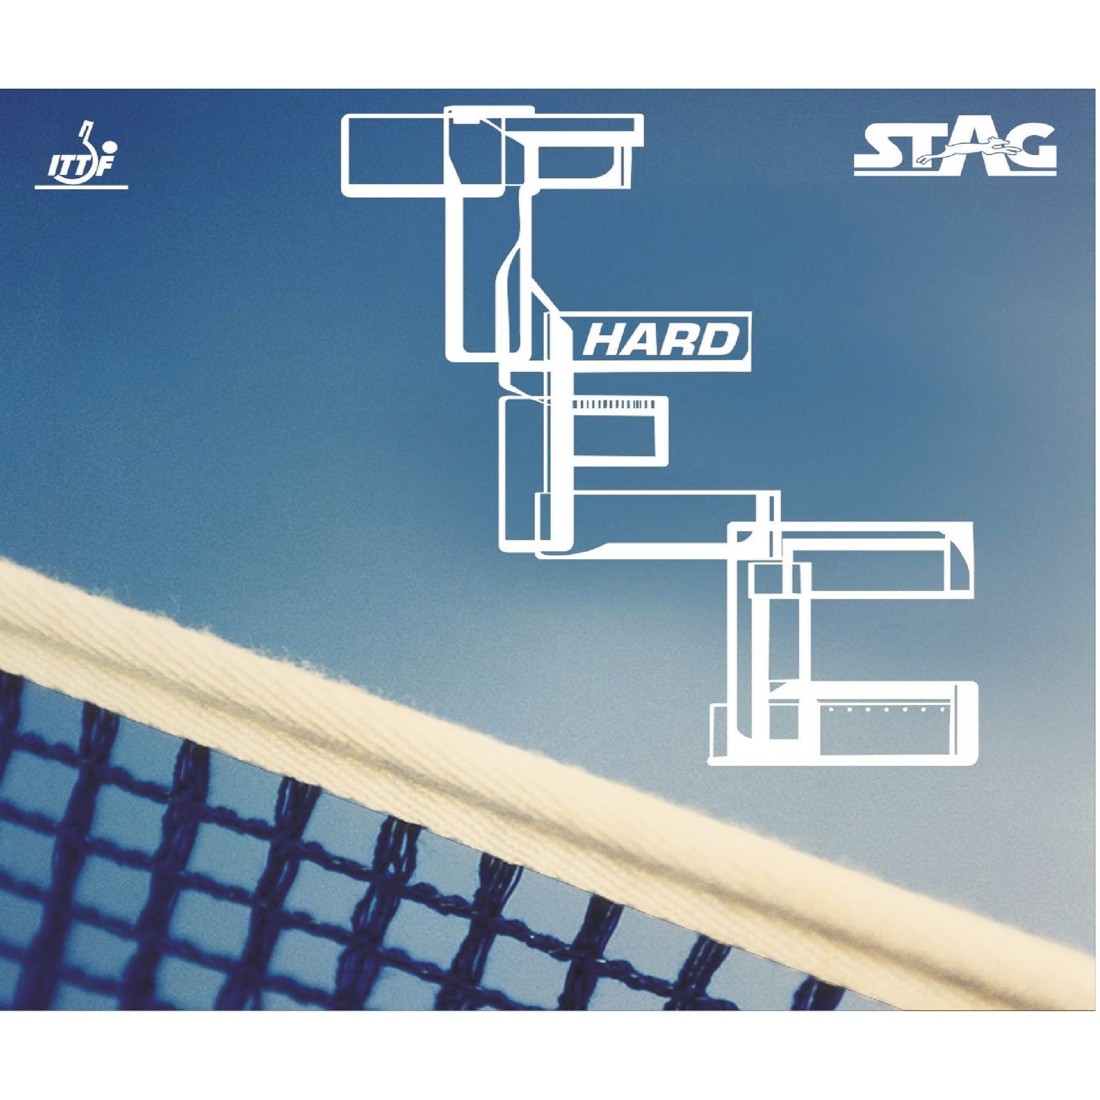 STAG TT RUBBER TEC HARD 2.0MM RED